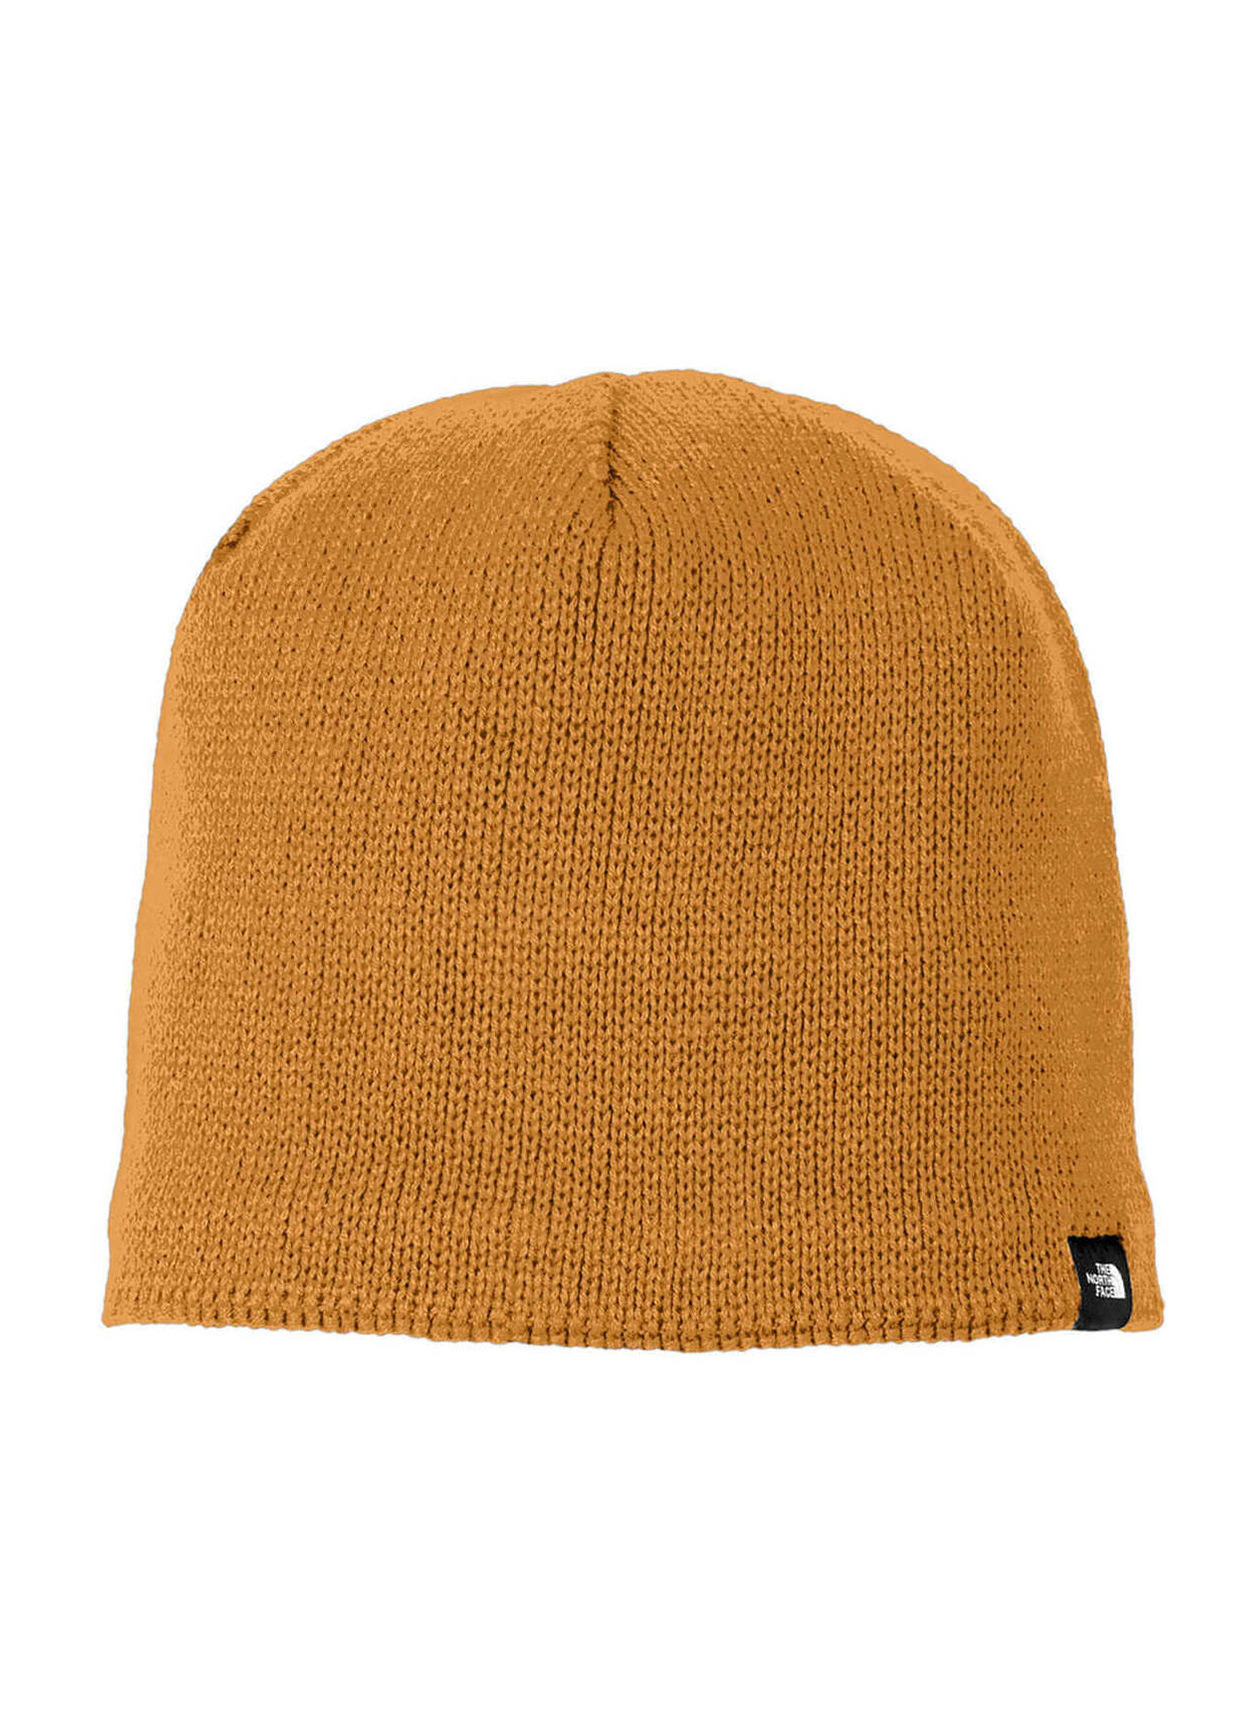 North North Tan Face | The Mountain The Beanie Timber Face